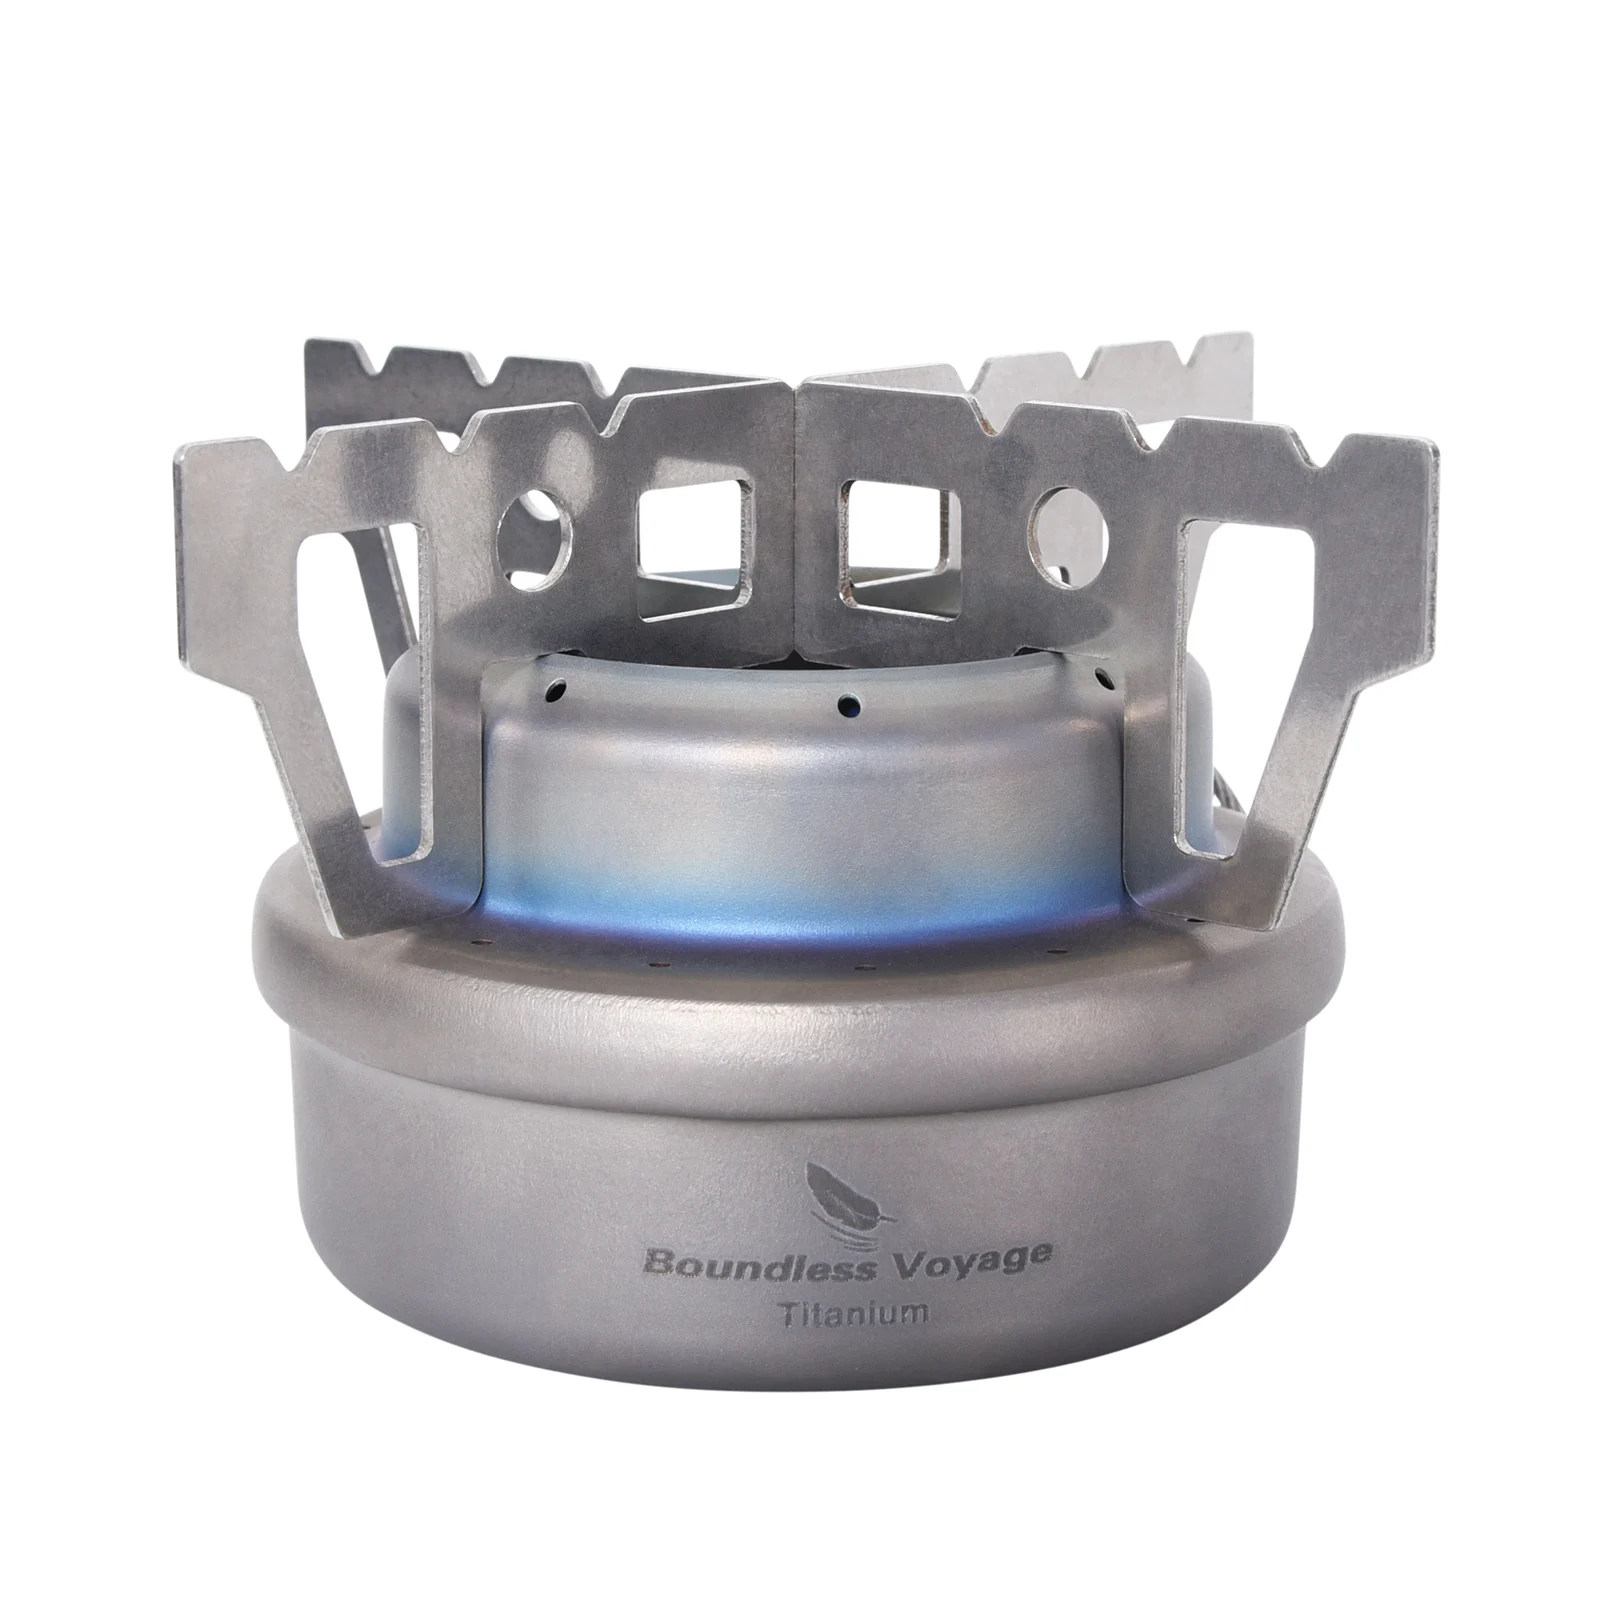 

Boundless Voyage Camping stove mini ultralight titanium backpacking alcohol Stove for picnic travel with stand, Silver